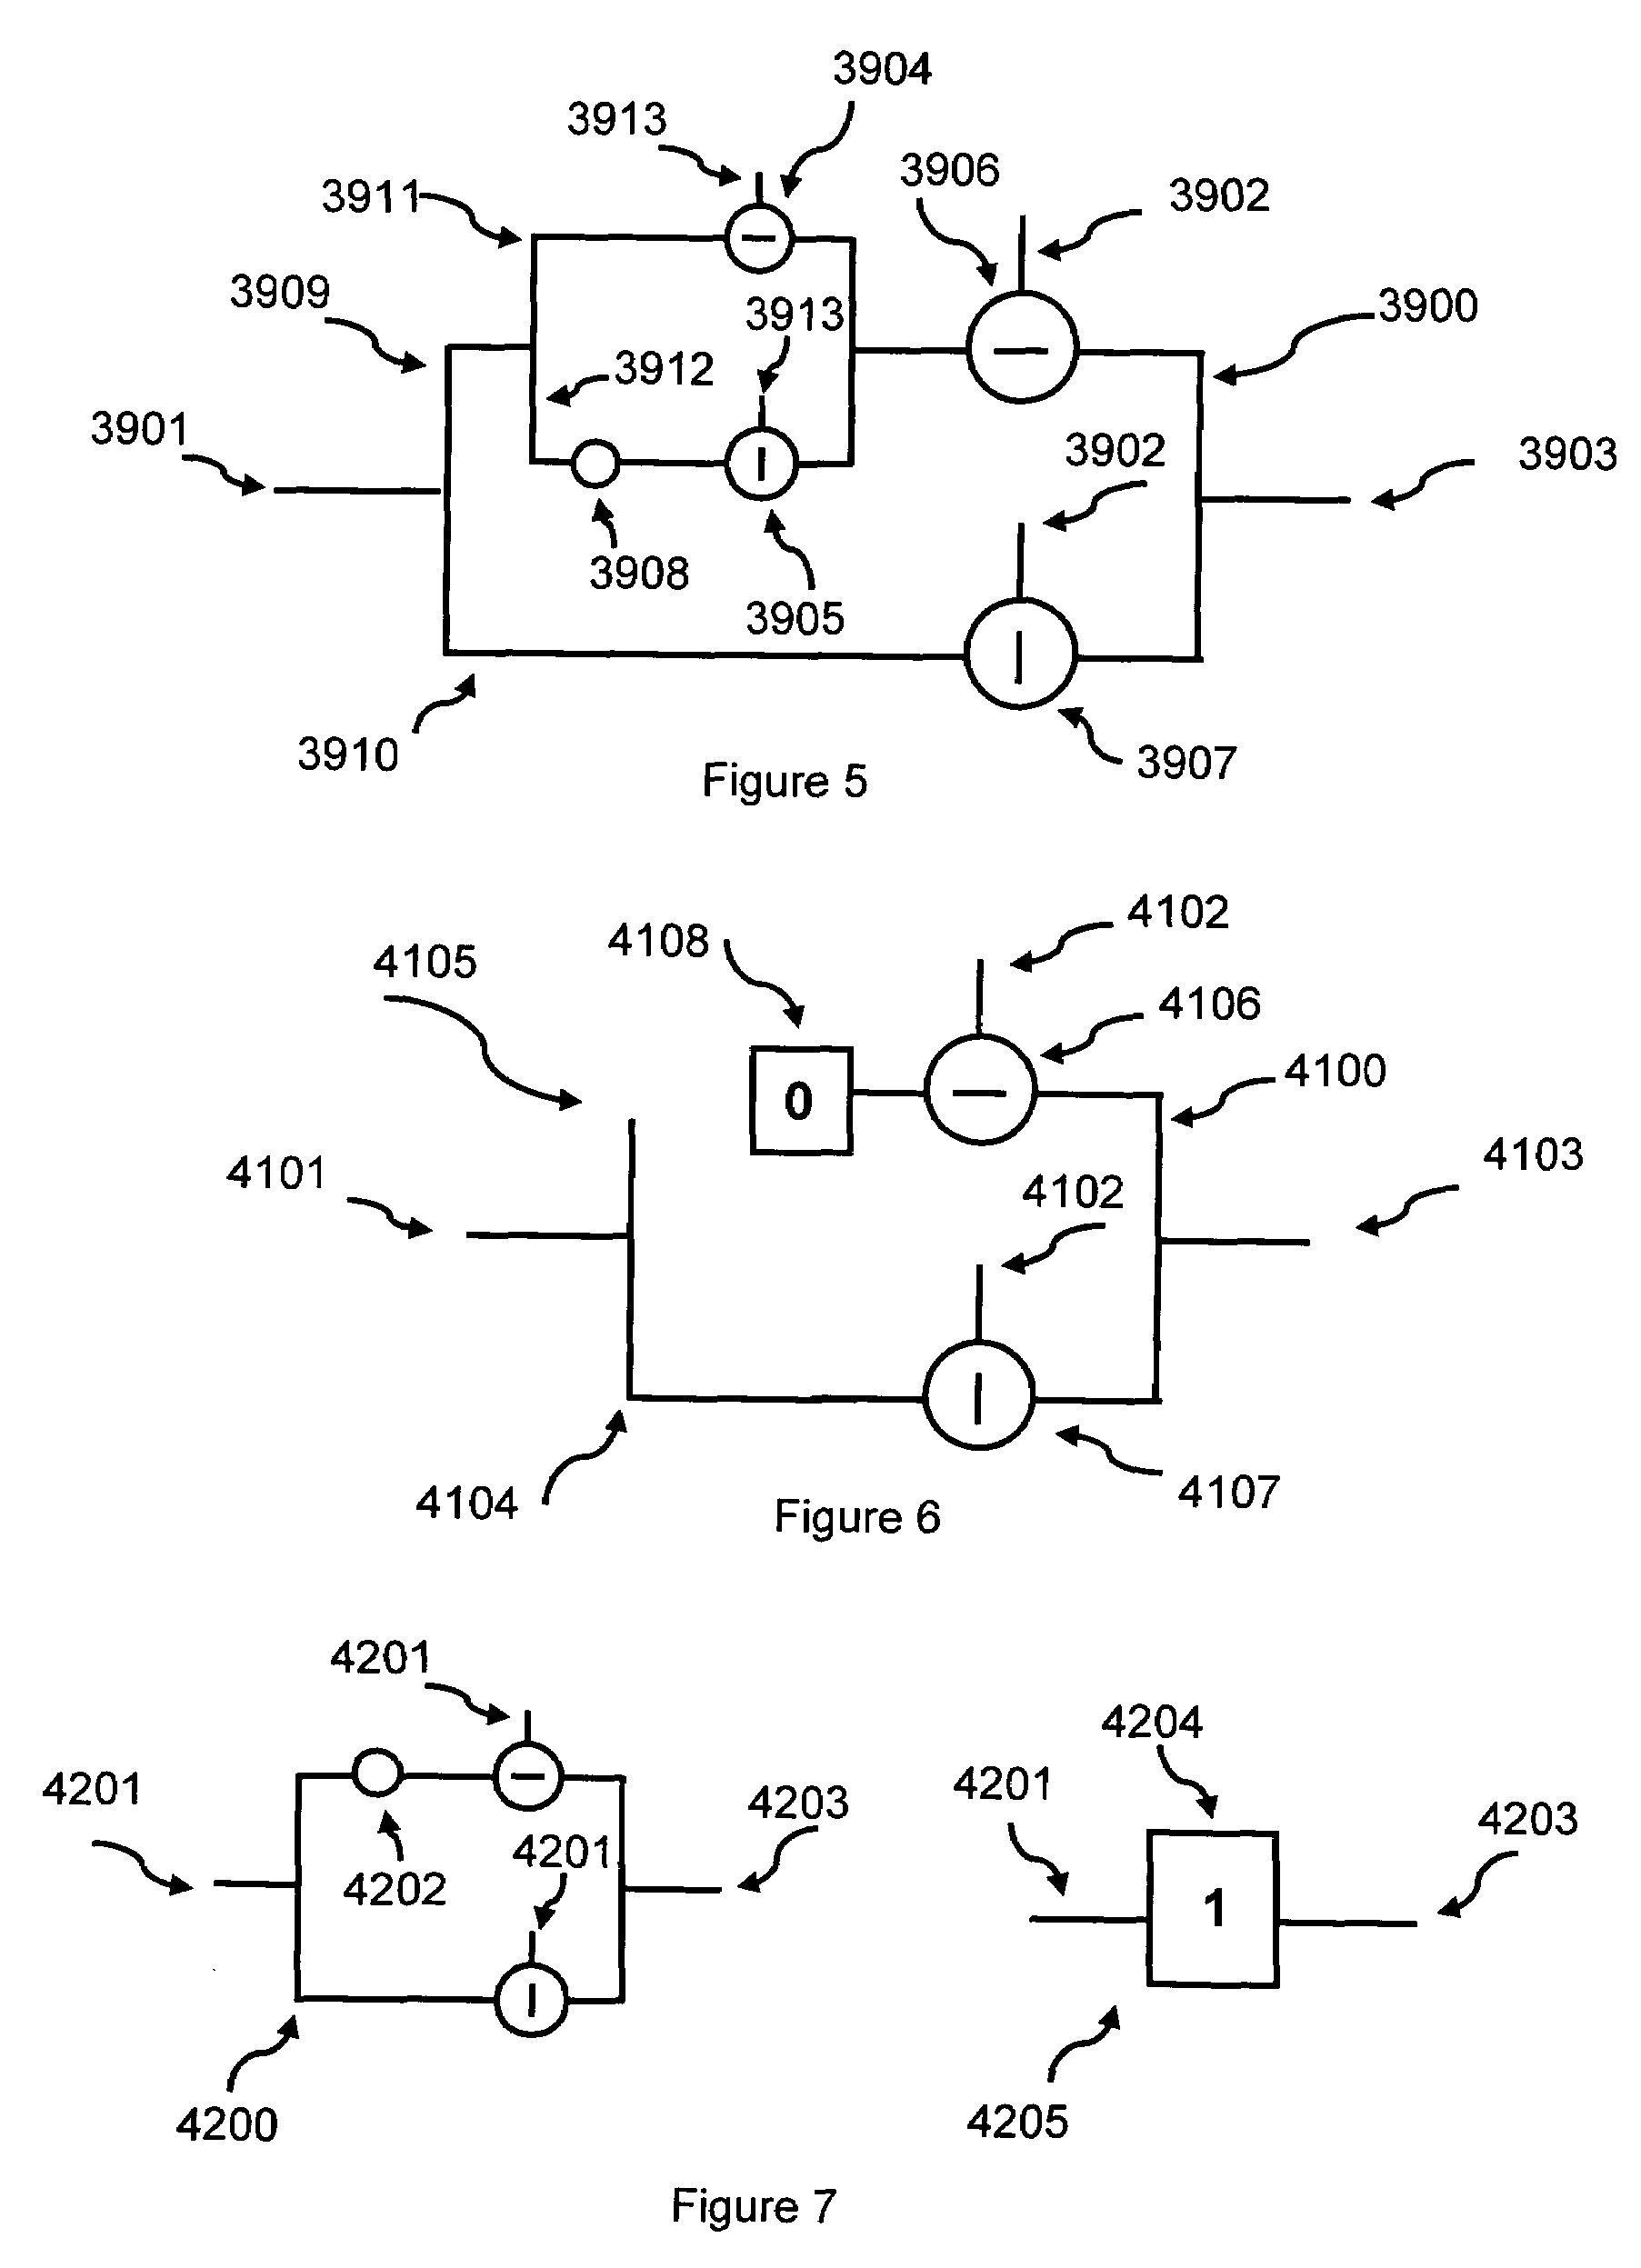 Single and composite binary and multi-valued logic functions from gates and inverters